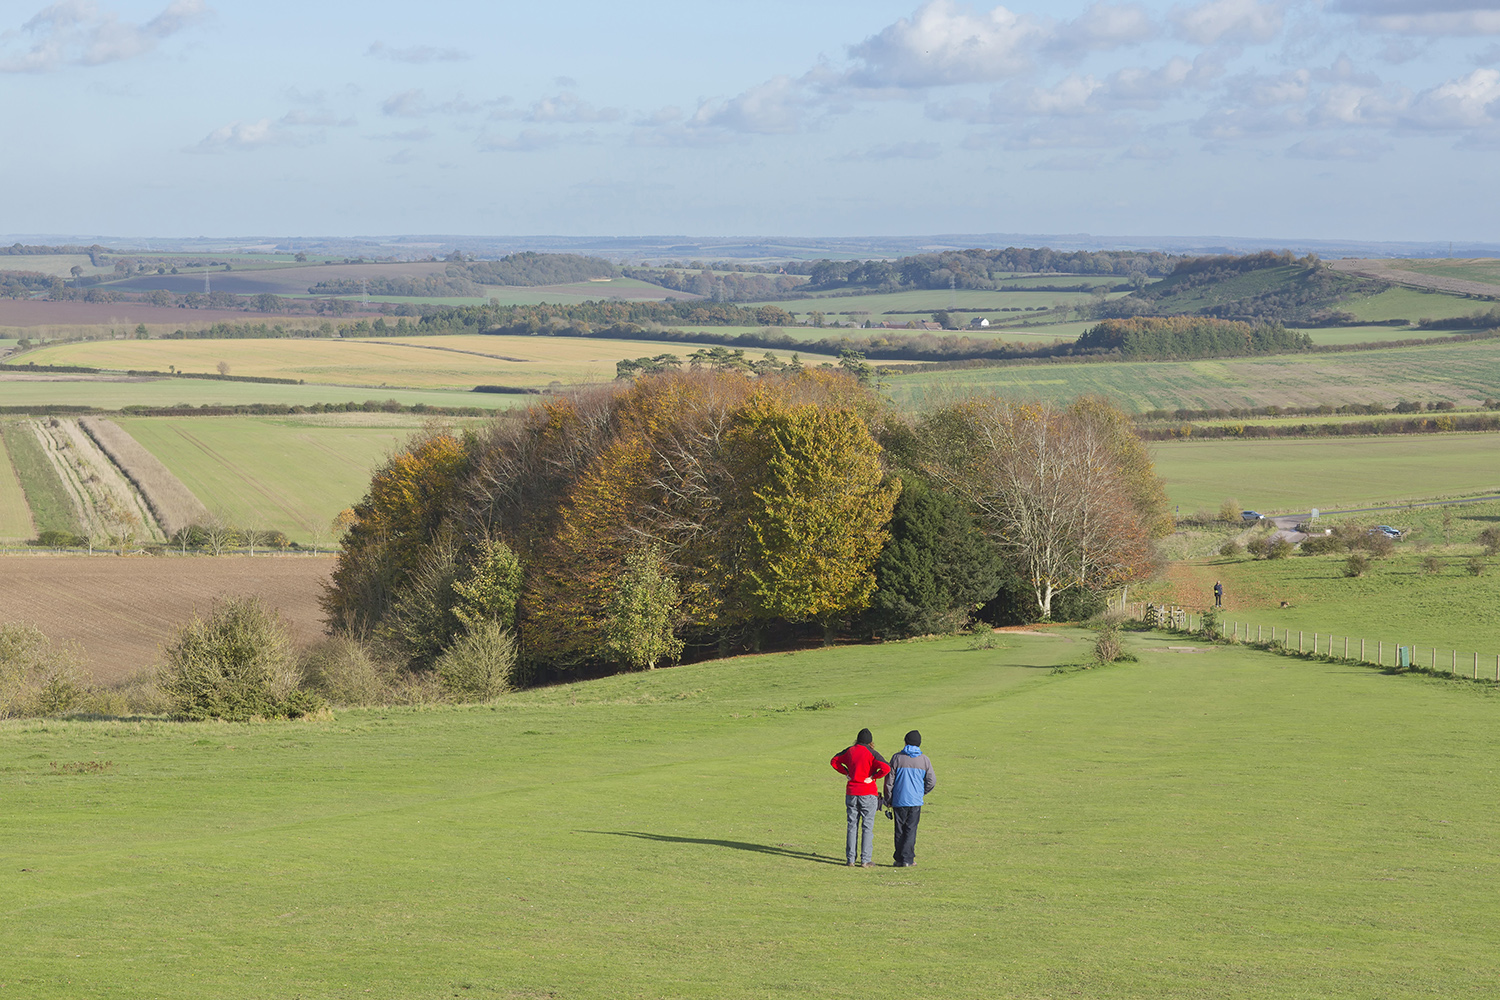 Danbury Hill Walkers And View